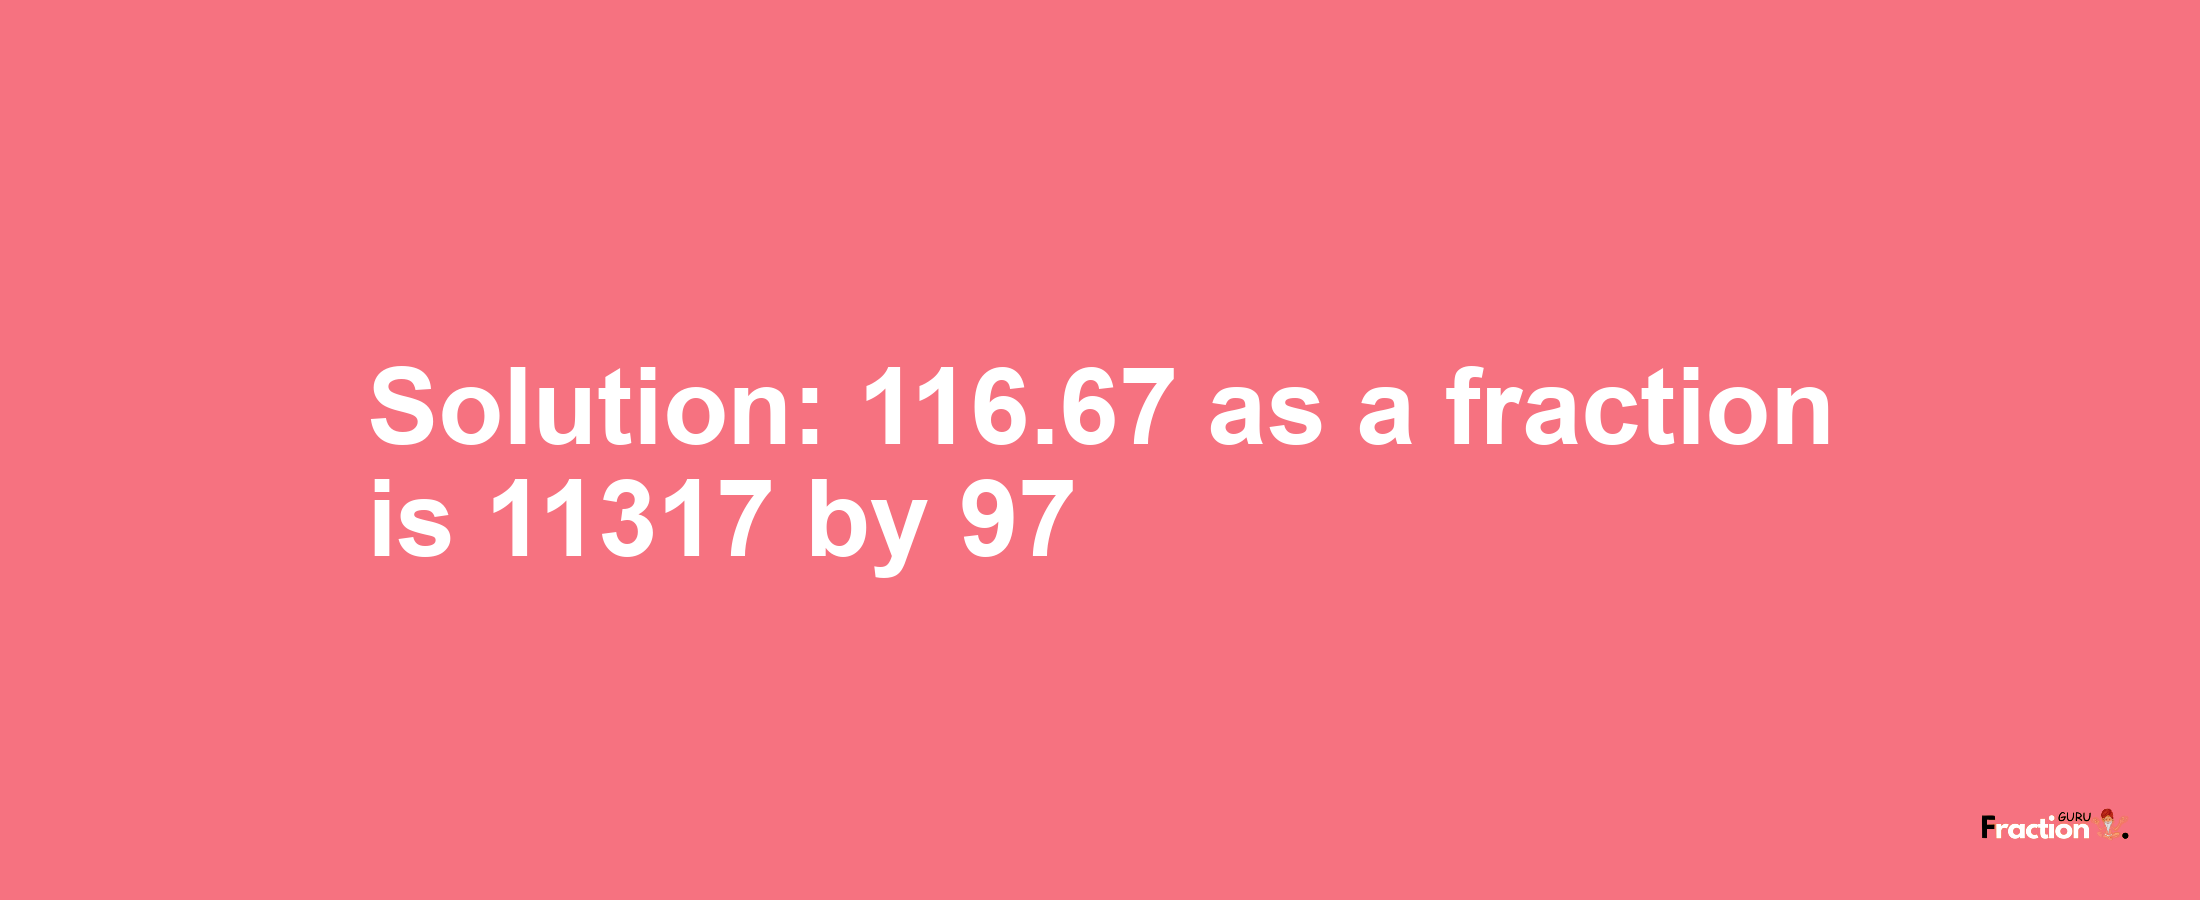 Solution:116.67 as a fraction is 11317/97